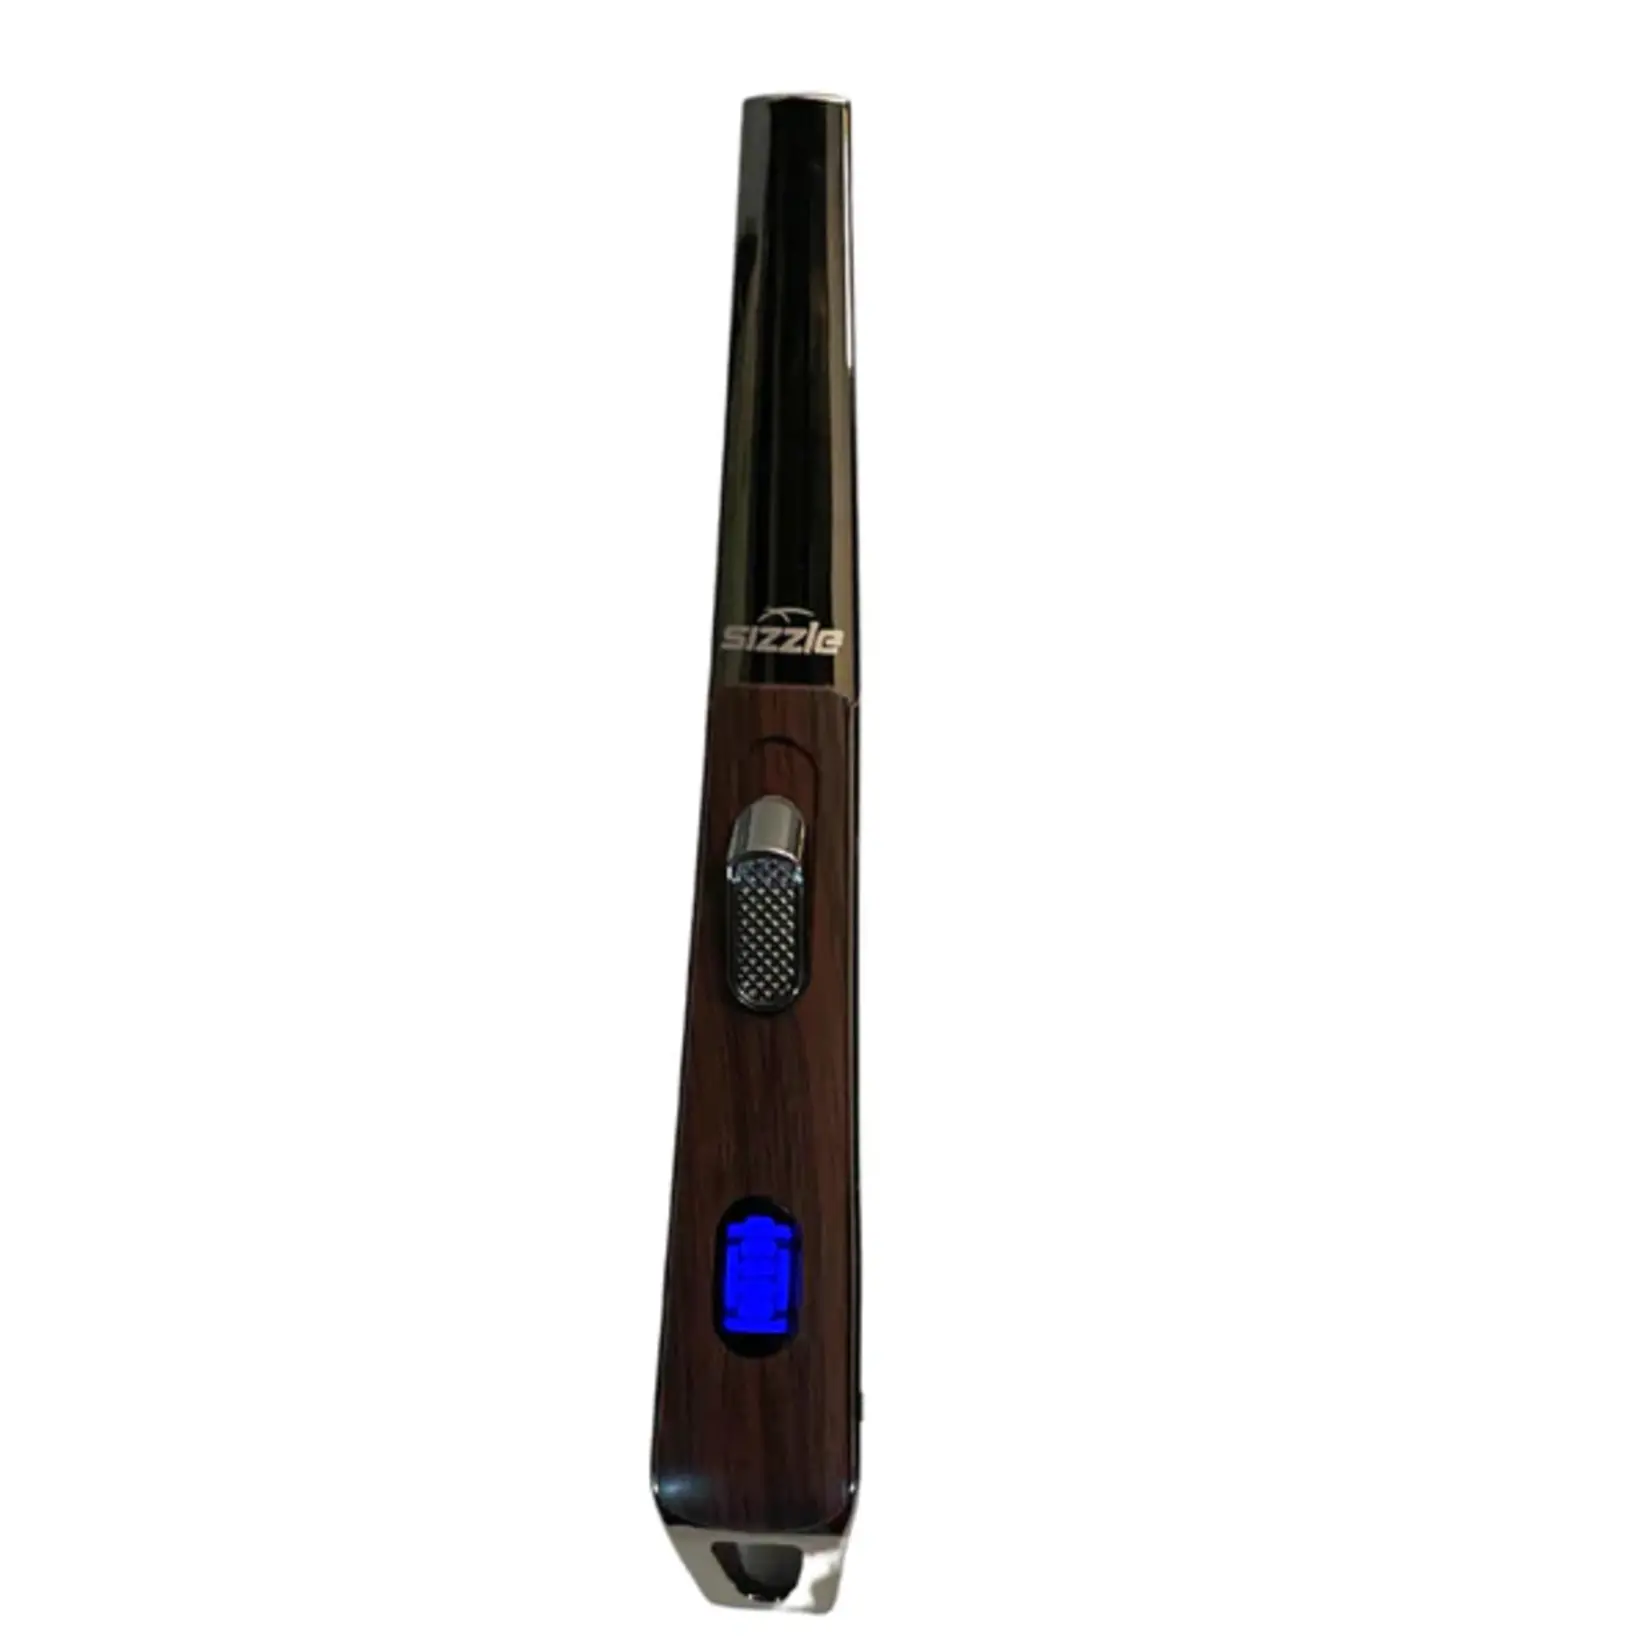 Sizzle Lighters The Lux USB Lighter - Walnut